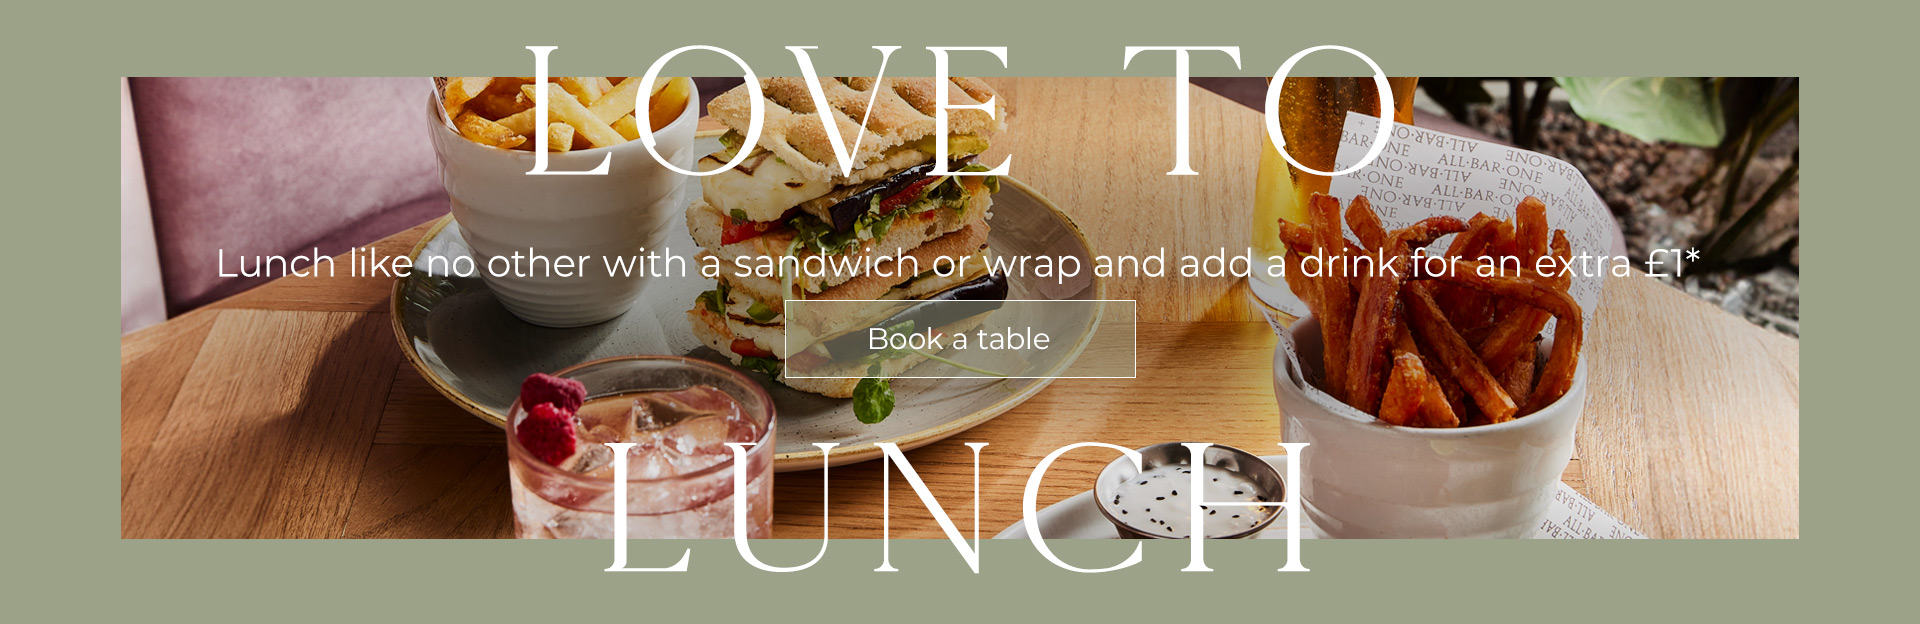 Lunch Offer at All Bar One Sheffield